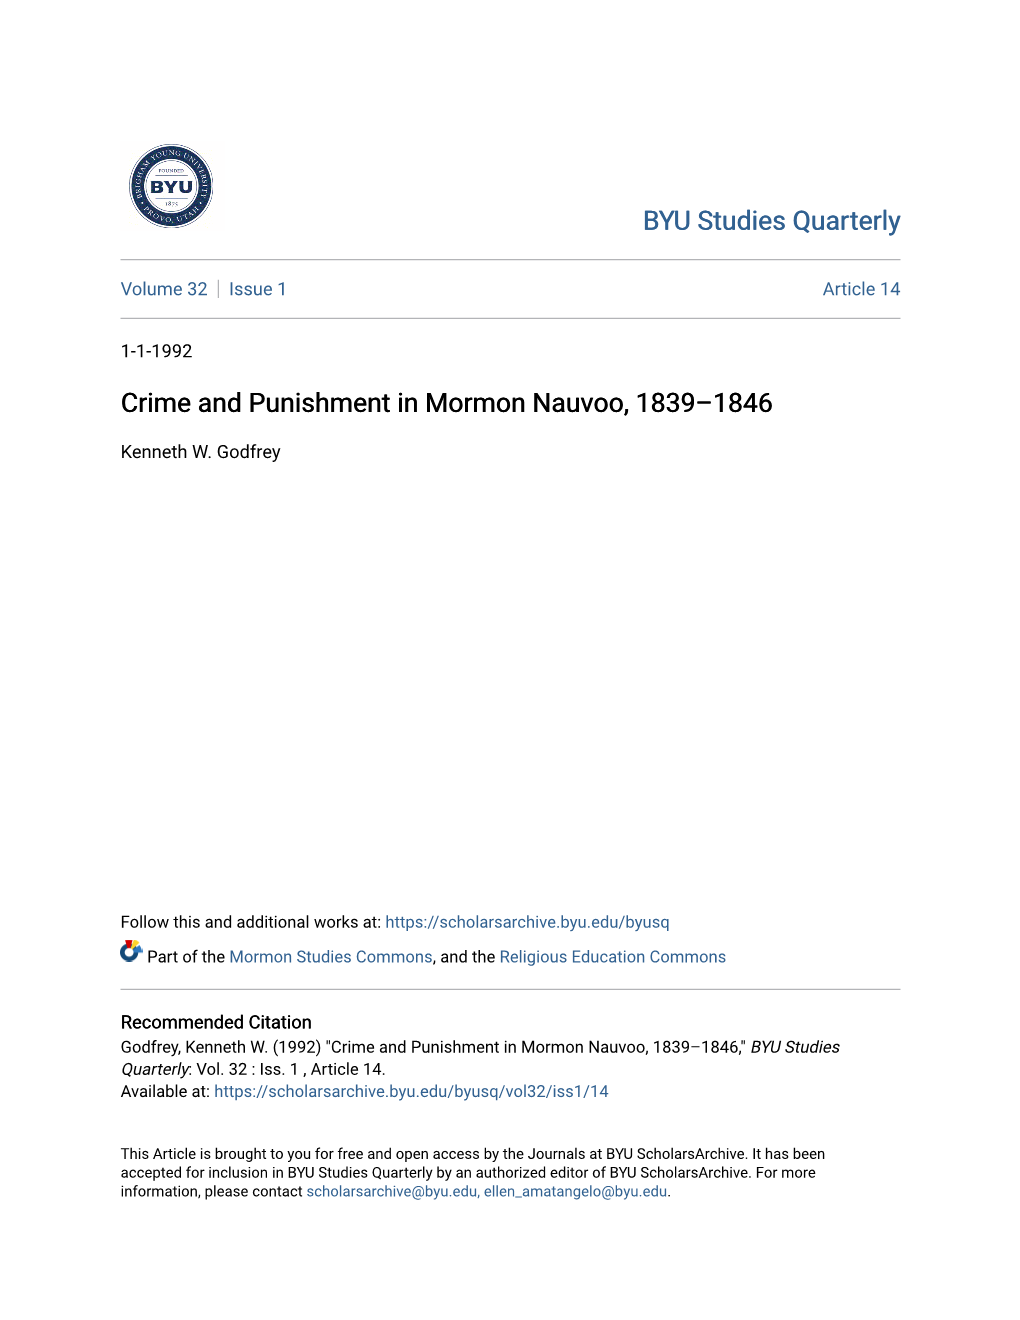 Crime and Punishment in Mormon Nauvoo, 1839–1846